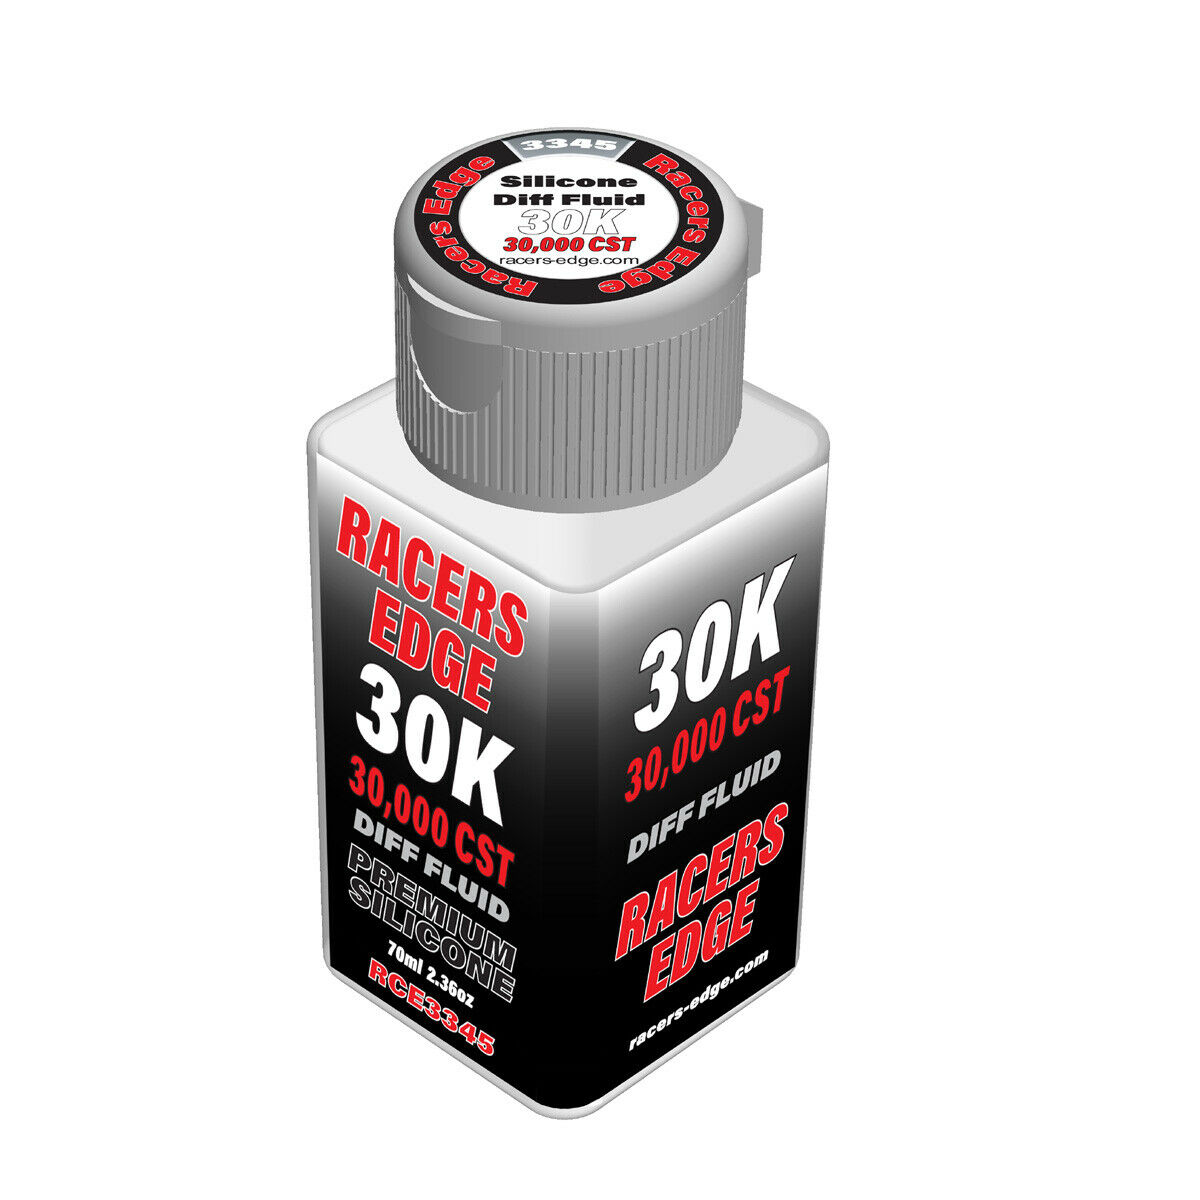 30,000cst 70ml 2.36oz Pure Silicone Diff Fluid Racers Edge Rce3345